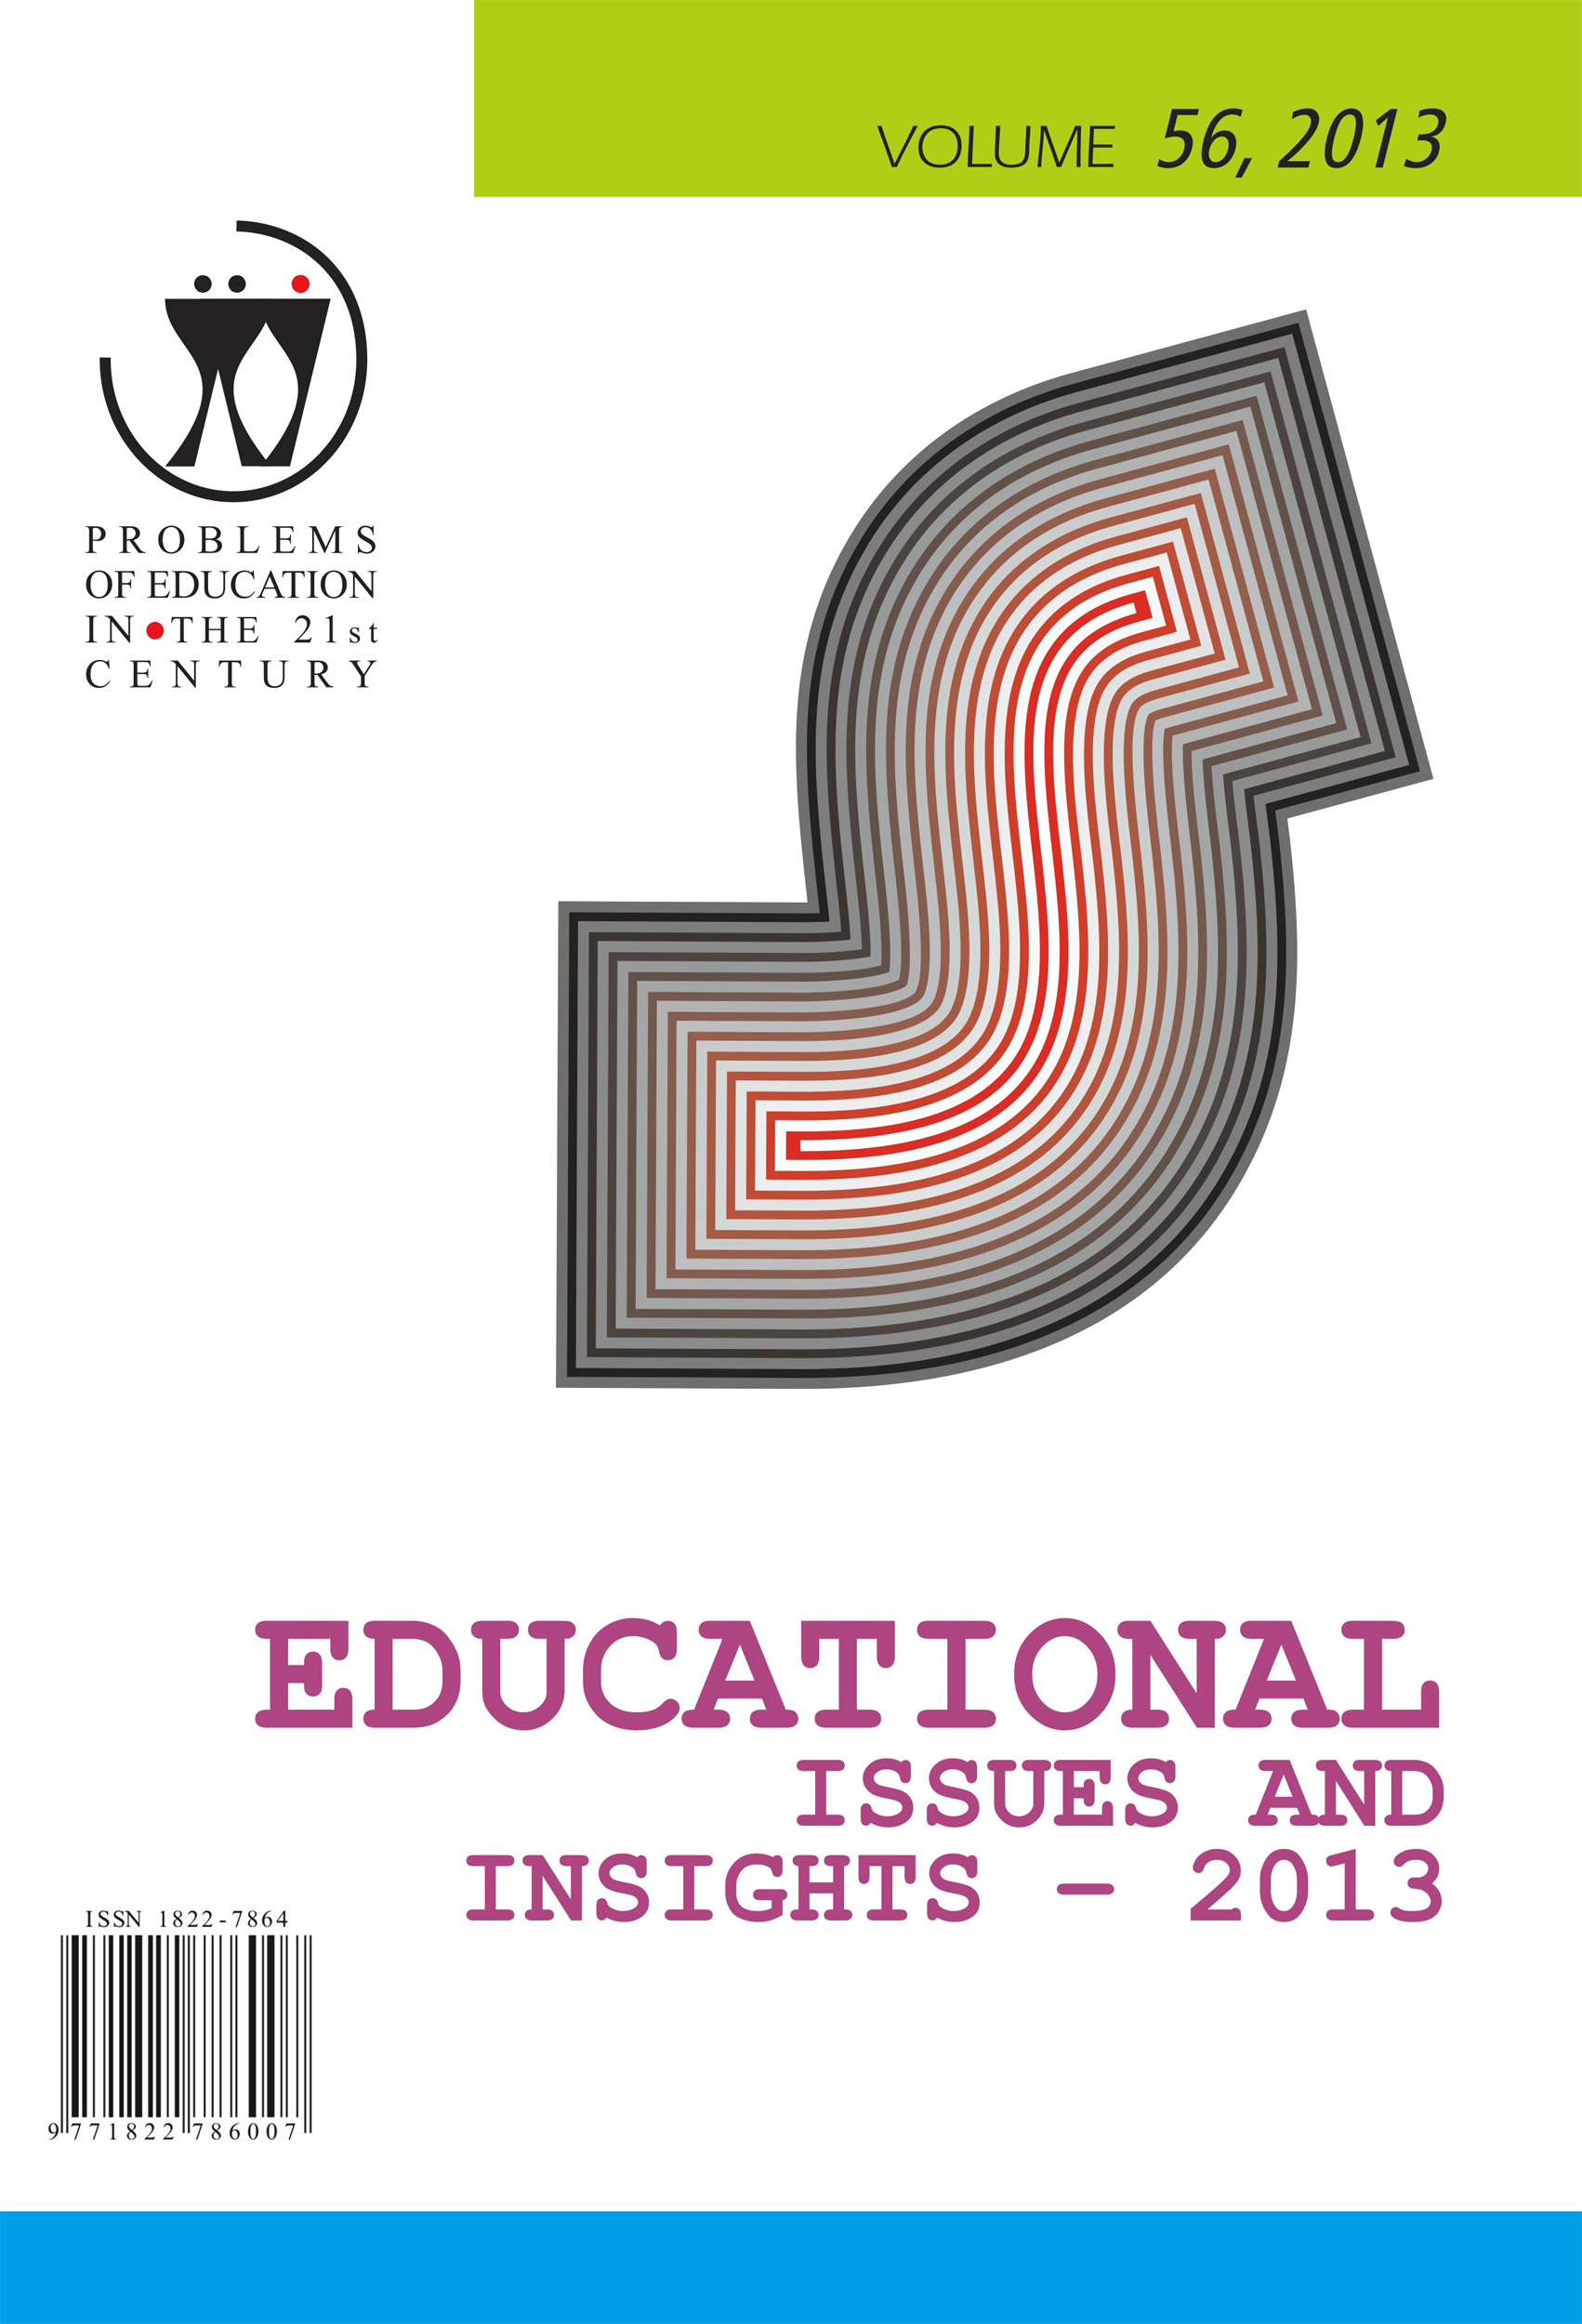 ANALYZING THE NEED FOR USING DIDACTIC STRATEGIES SPECIFIC TO NON-FORMAL EDUCATION IN THE CONTINUED PROFESSIONAL TRAINING OF TEACHERS –  A CASE STUDY FROM BIHOR COUNTY, ROMANIA